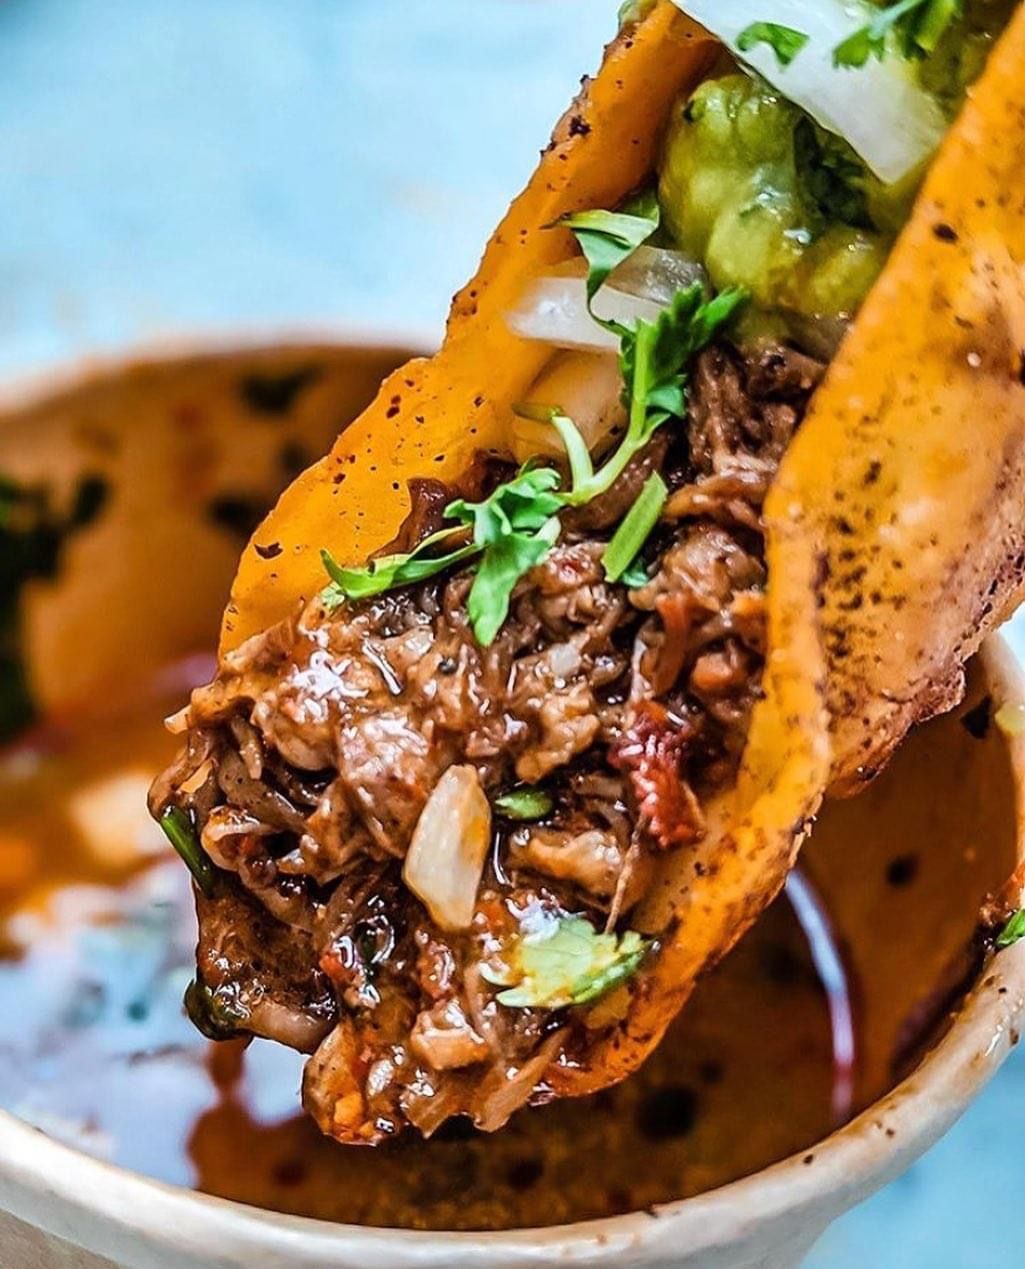 Taco Rock Opens Third Location in Falls Church With More DMV Locations in the Works